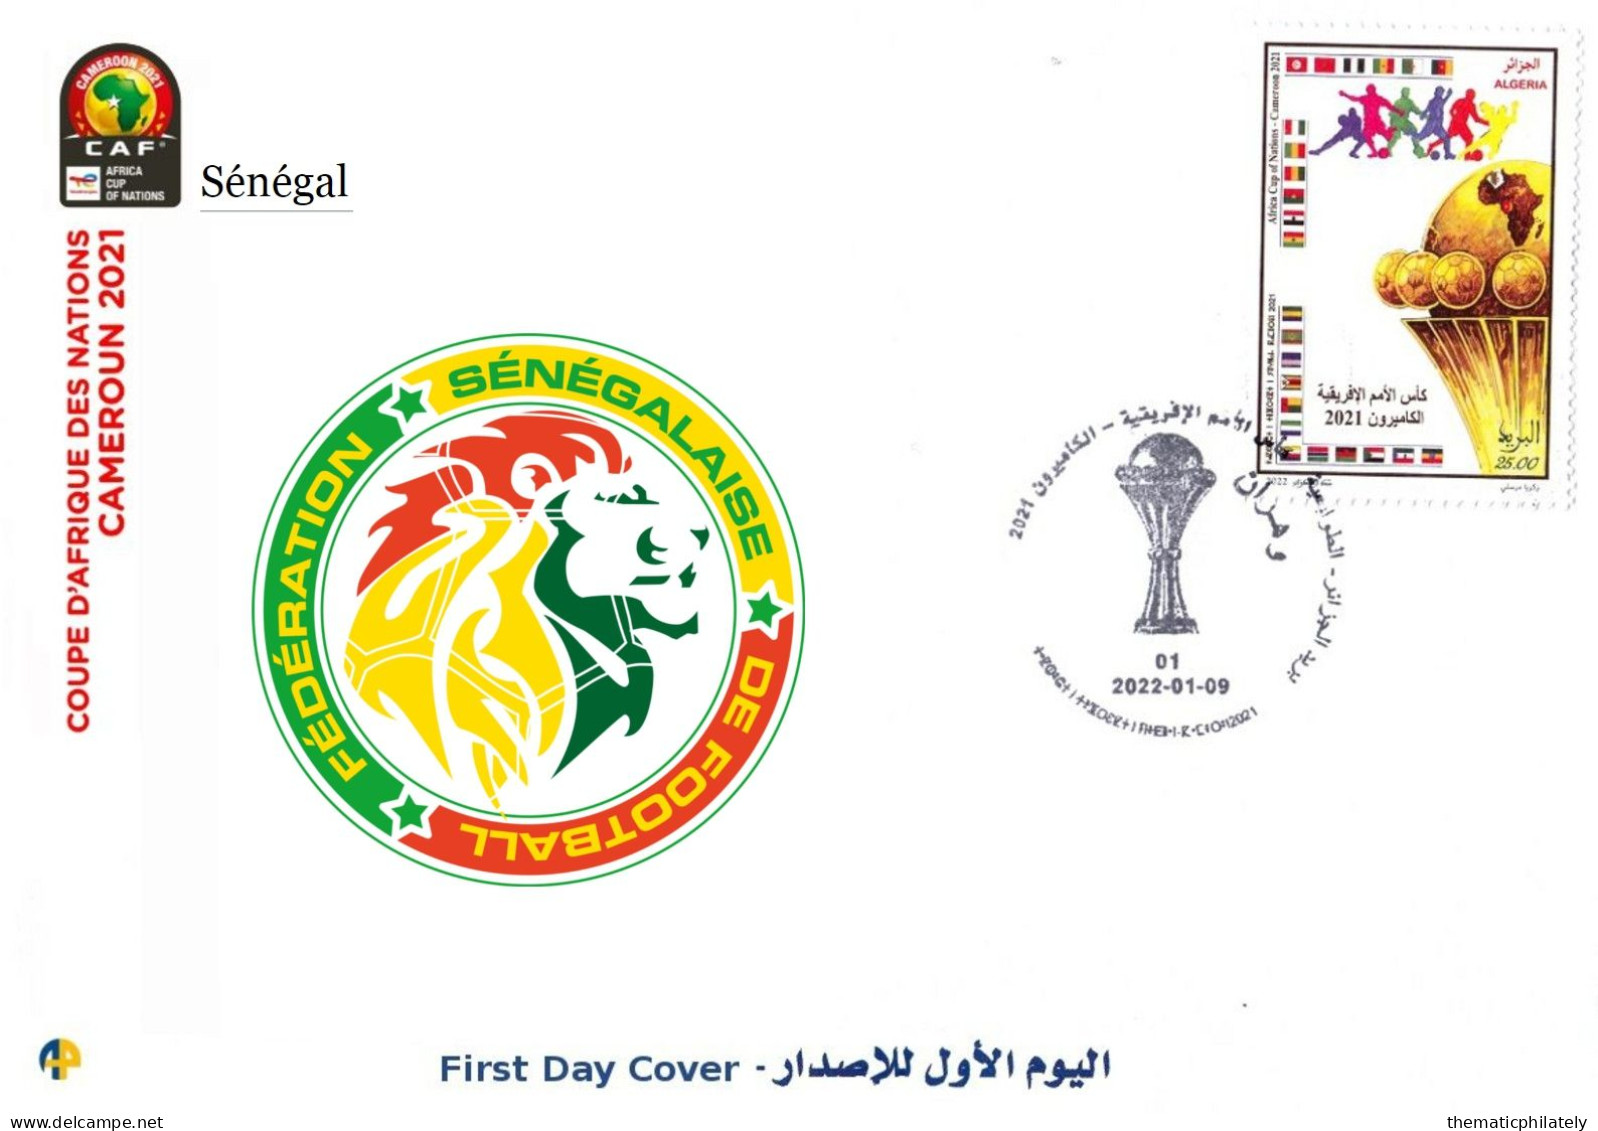 Algeria FDC 1888 Coupe D'Afrique Des Nations Football 2021 Africa Cup Of Nations Soccer CAF Sénégal Senegal - Coupe D'Afrique Des Nations